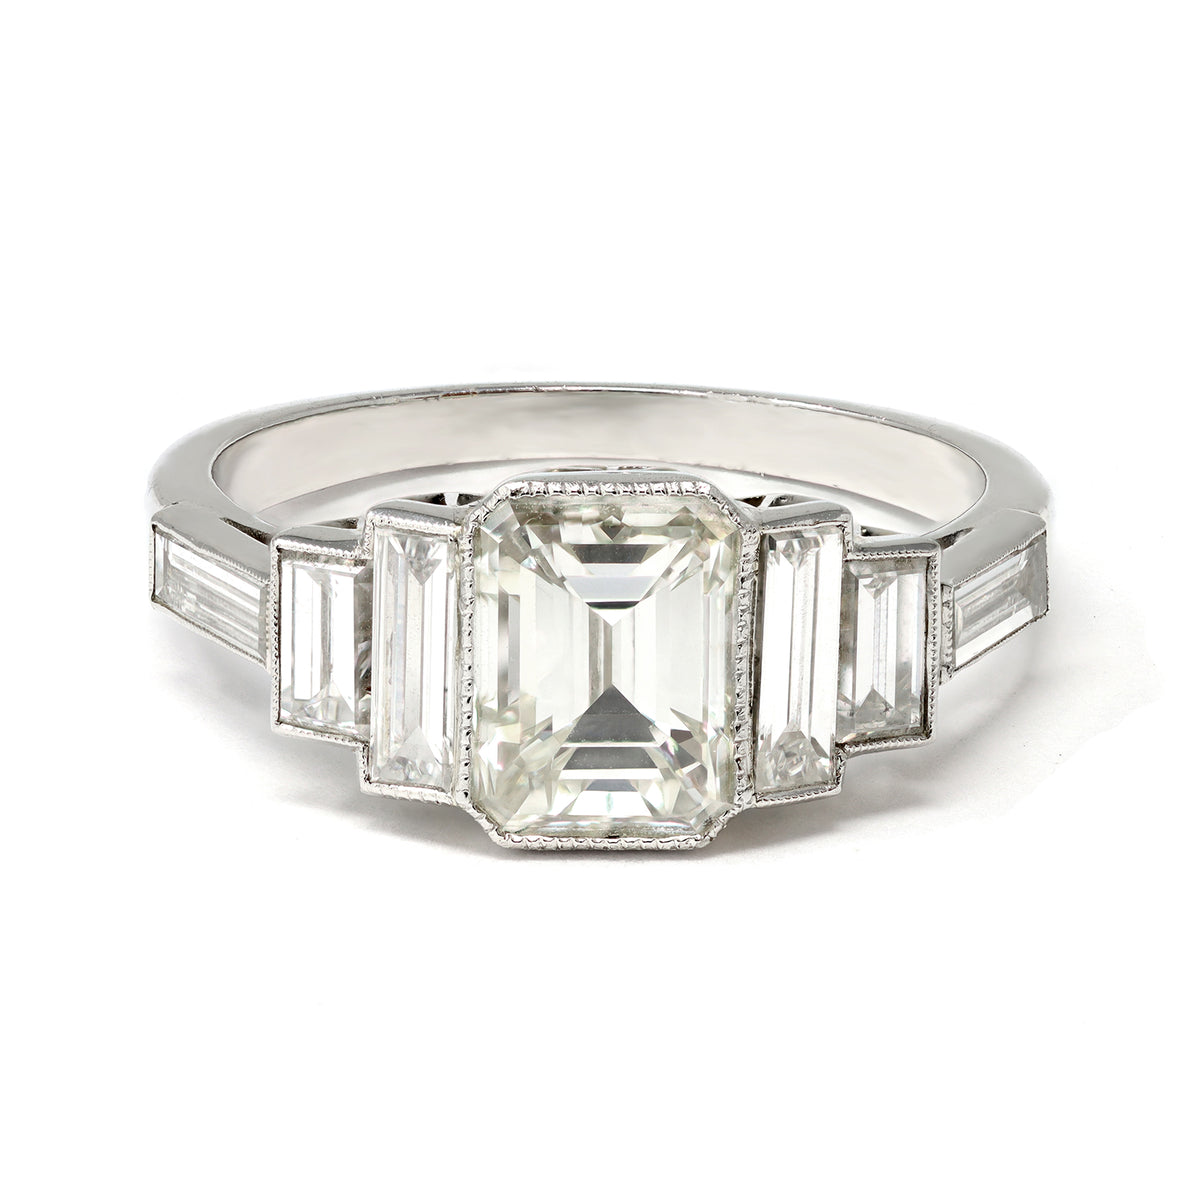 An Elegant Emerald-cut Diamond Ring with side baguettes set in Platinum top view